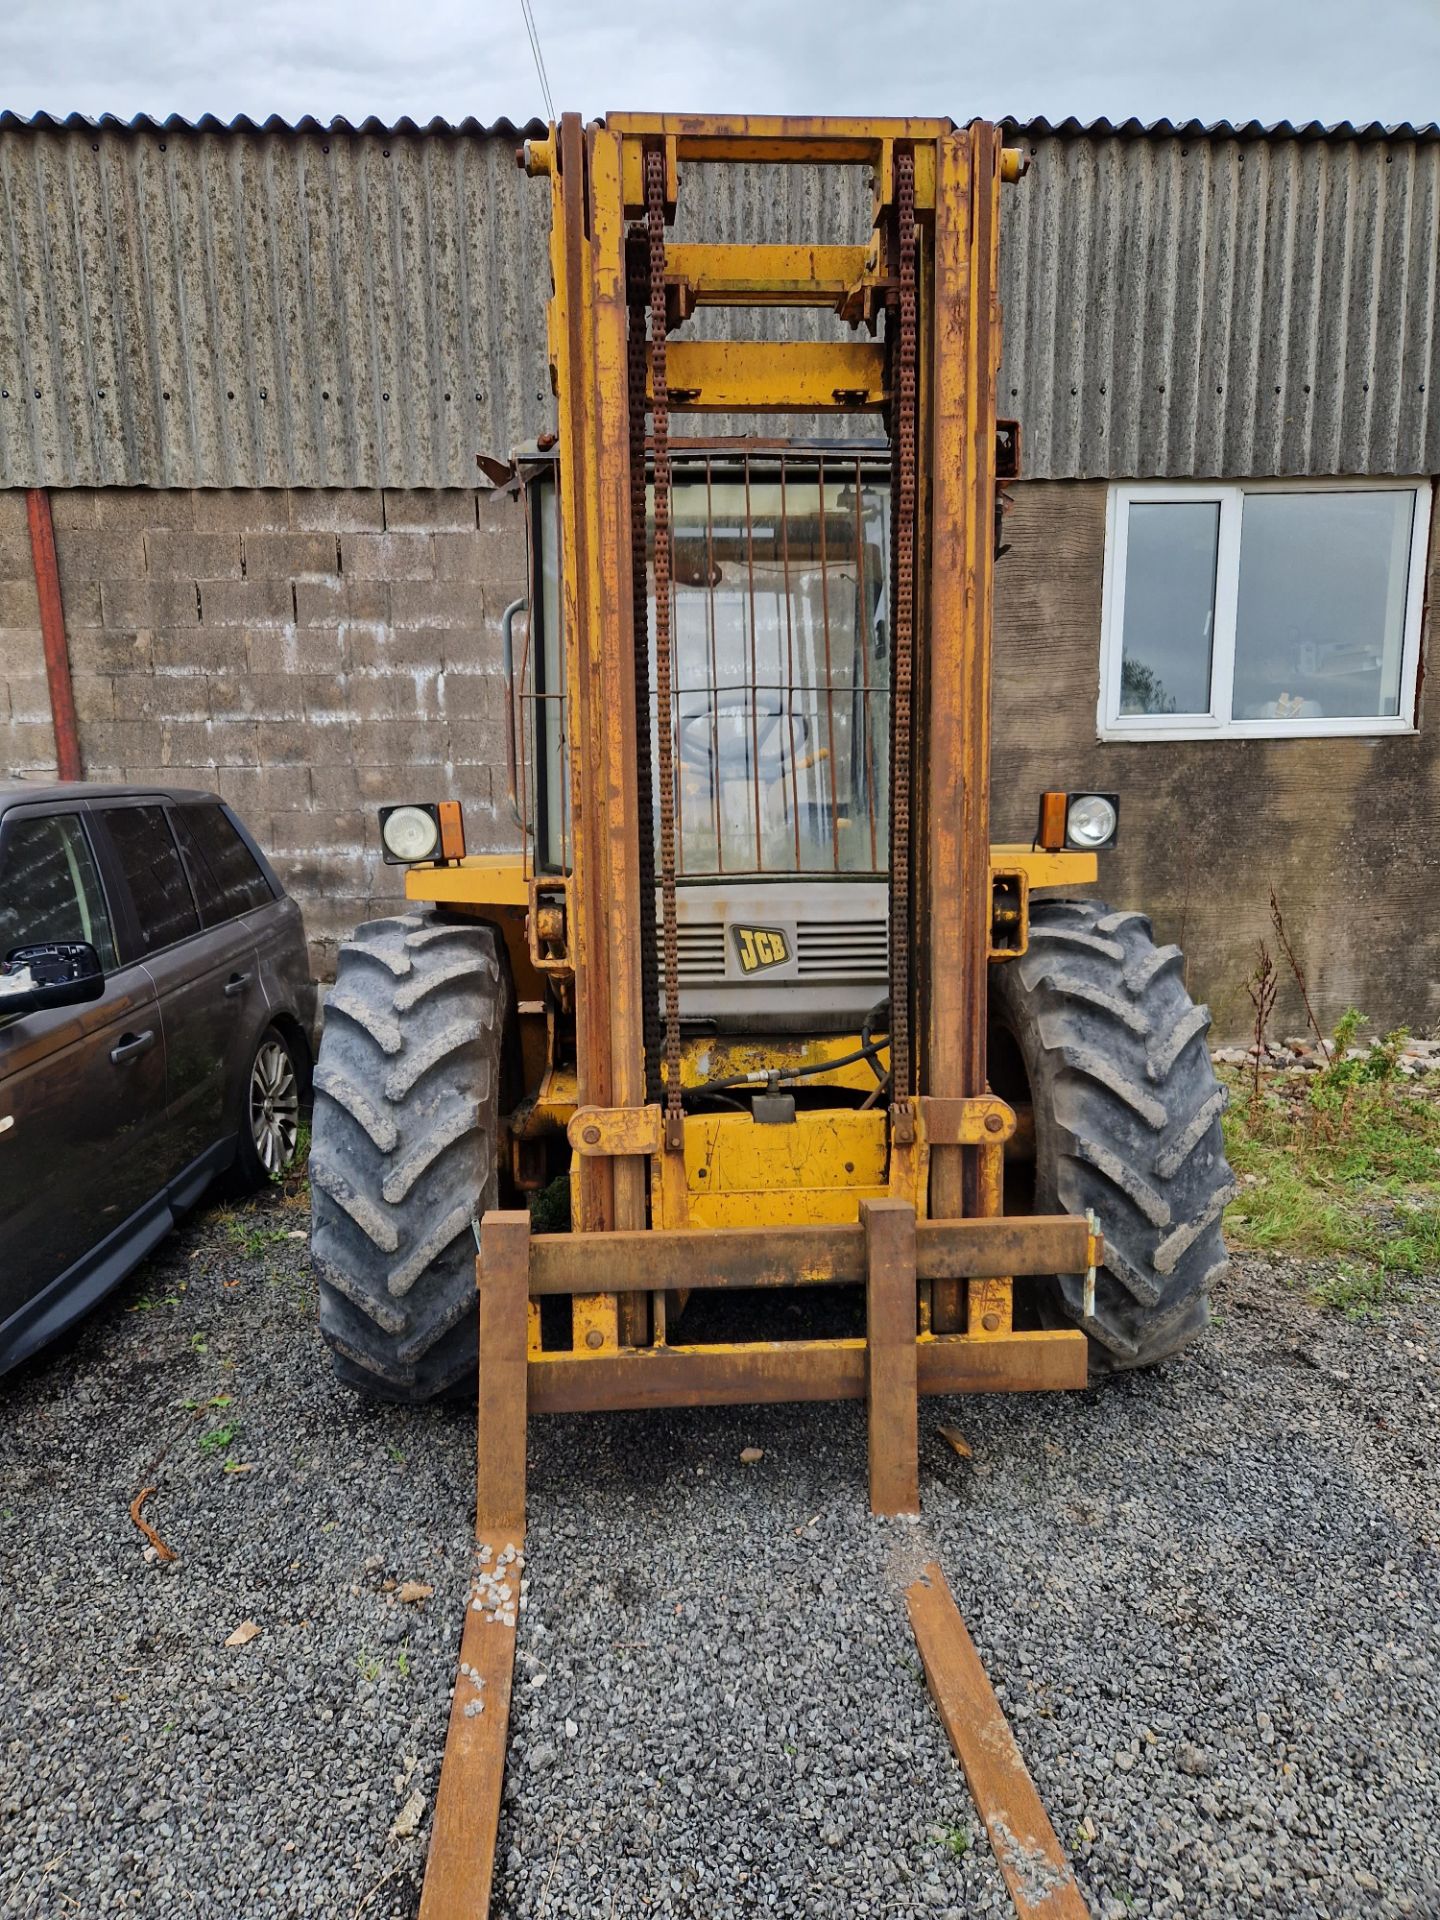 JCB 926 Rough Terrain Fork Lift Truck, YoM 1985, No key, Running State Unknown Please read the - Image 3 of 9